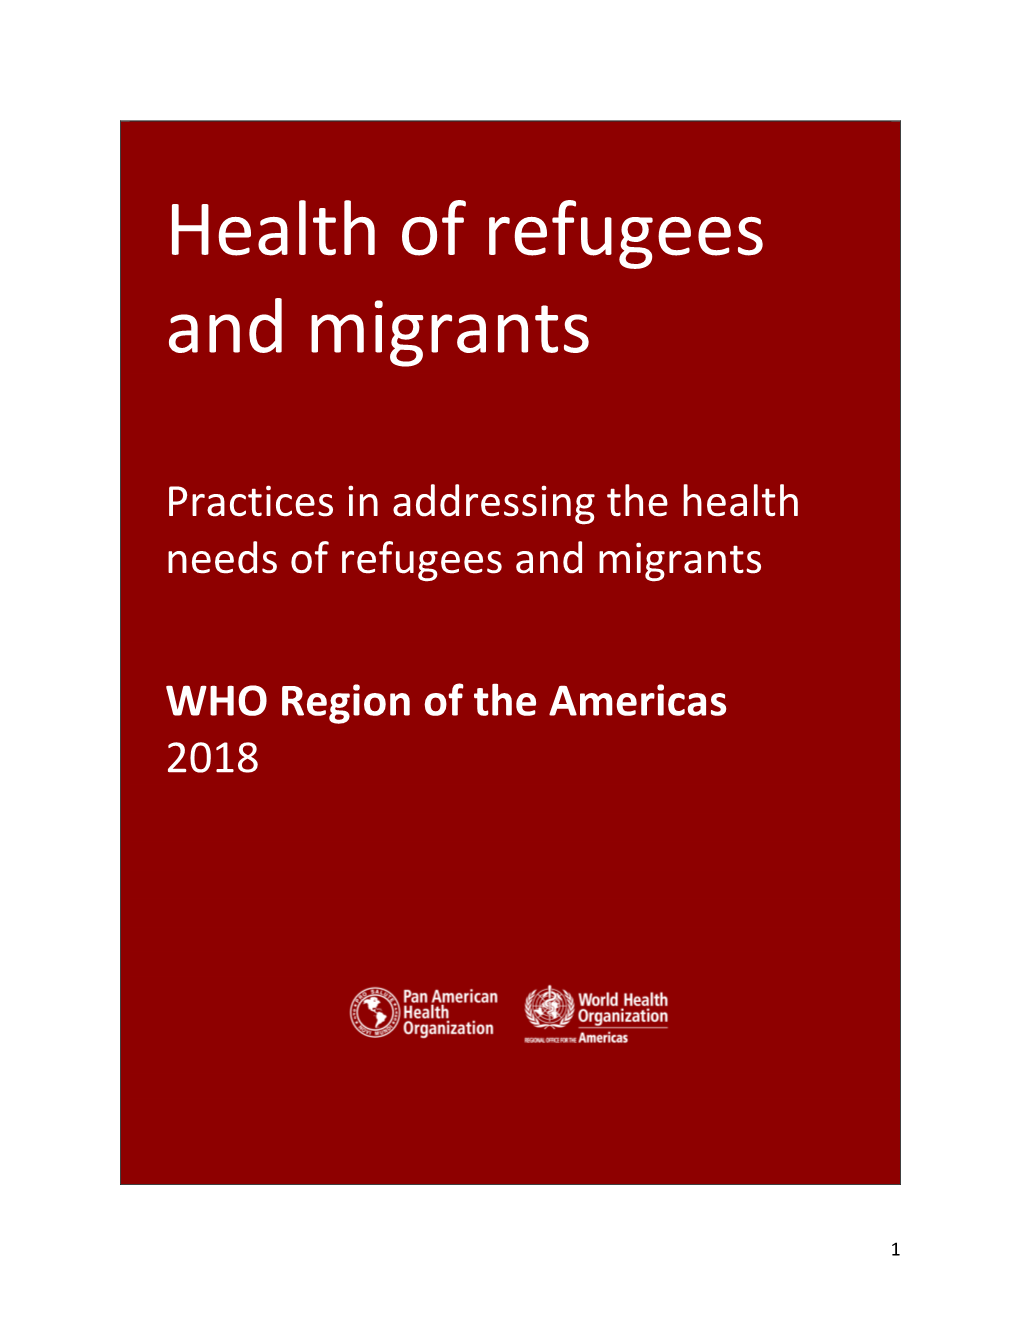 Practices in Addressing the Health Needs of Refugees and Migrants